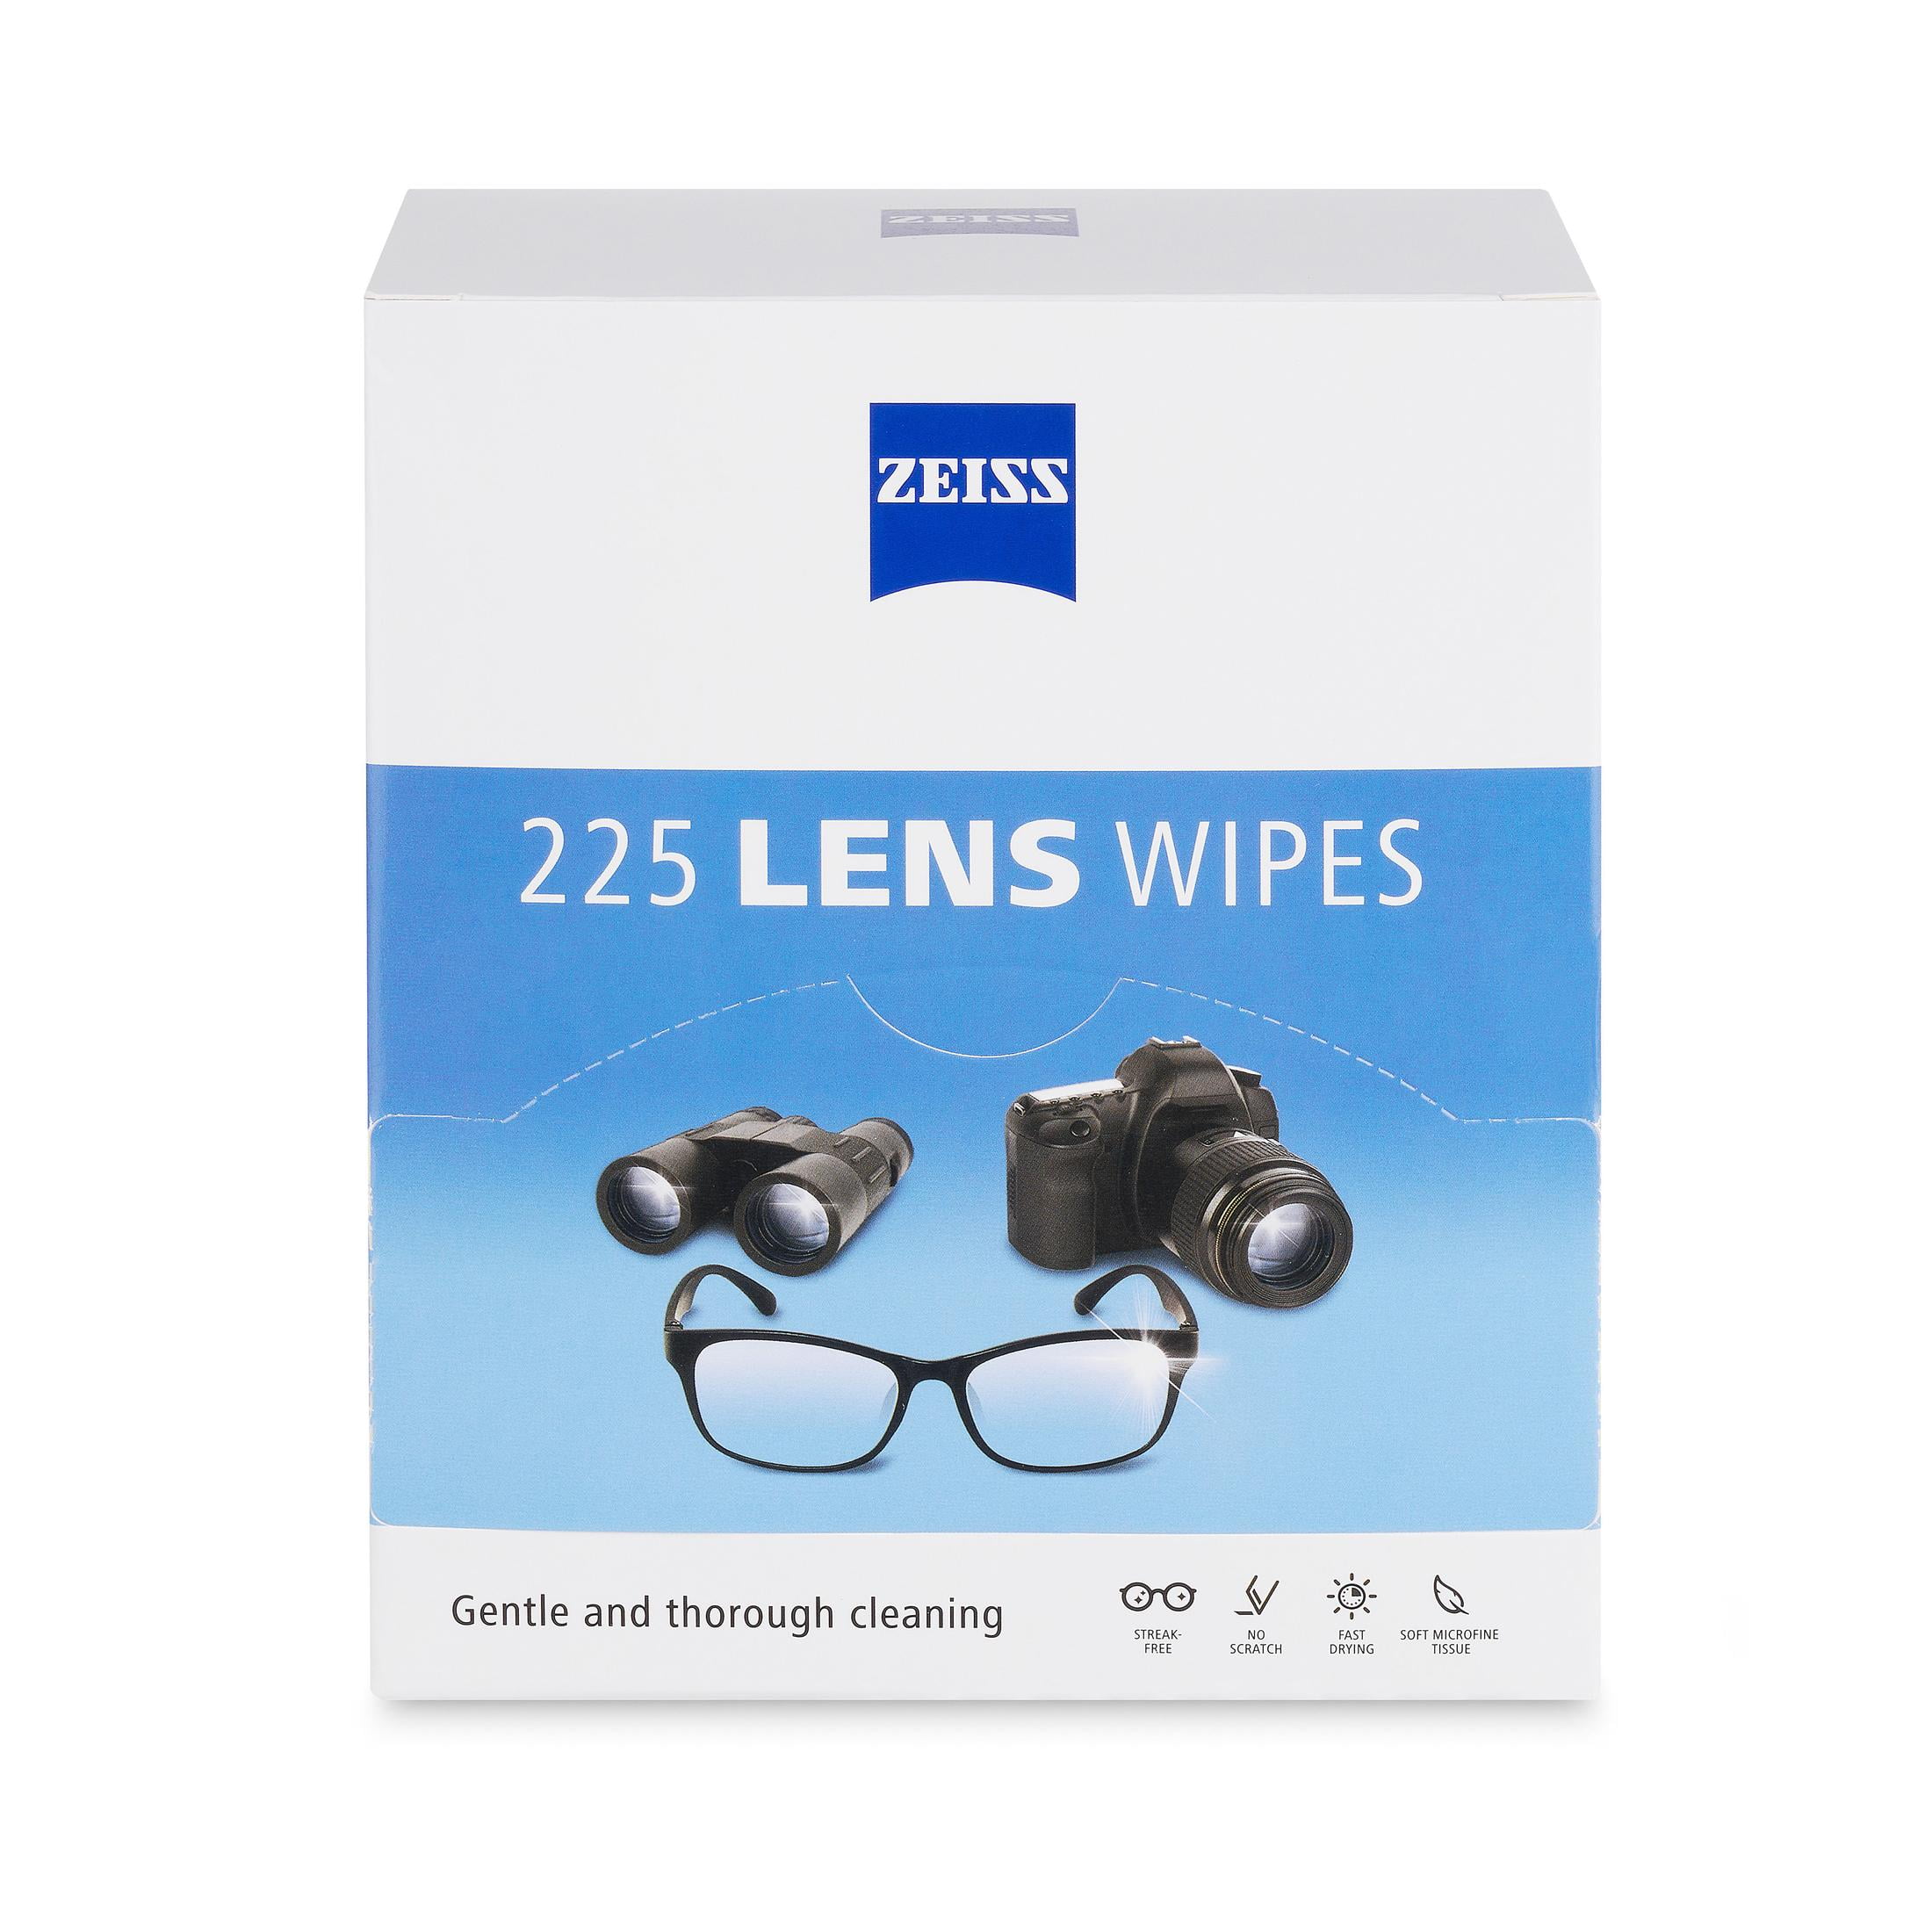 100pcs/Box Eyeglass Cleaner Lens Wipes, Eye Glasses Cleaner Wipes,  Pre-Moistened Individually Wrapped Wipes, Non-Scratching,  Non-Streaking,Anti-Fog, Safe For Eyeglasses, Goggles, Camera Lenses, And  Cleaning Supplies